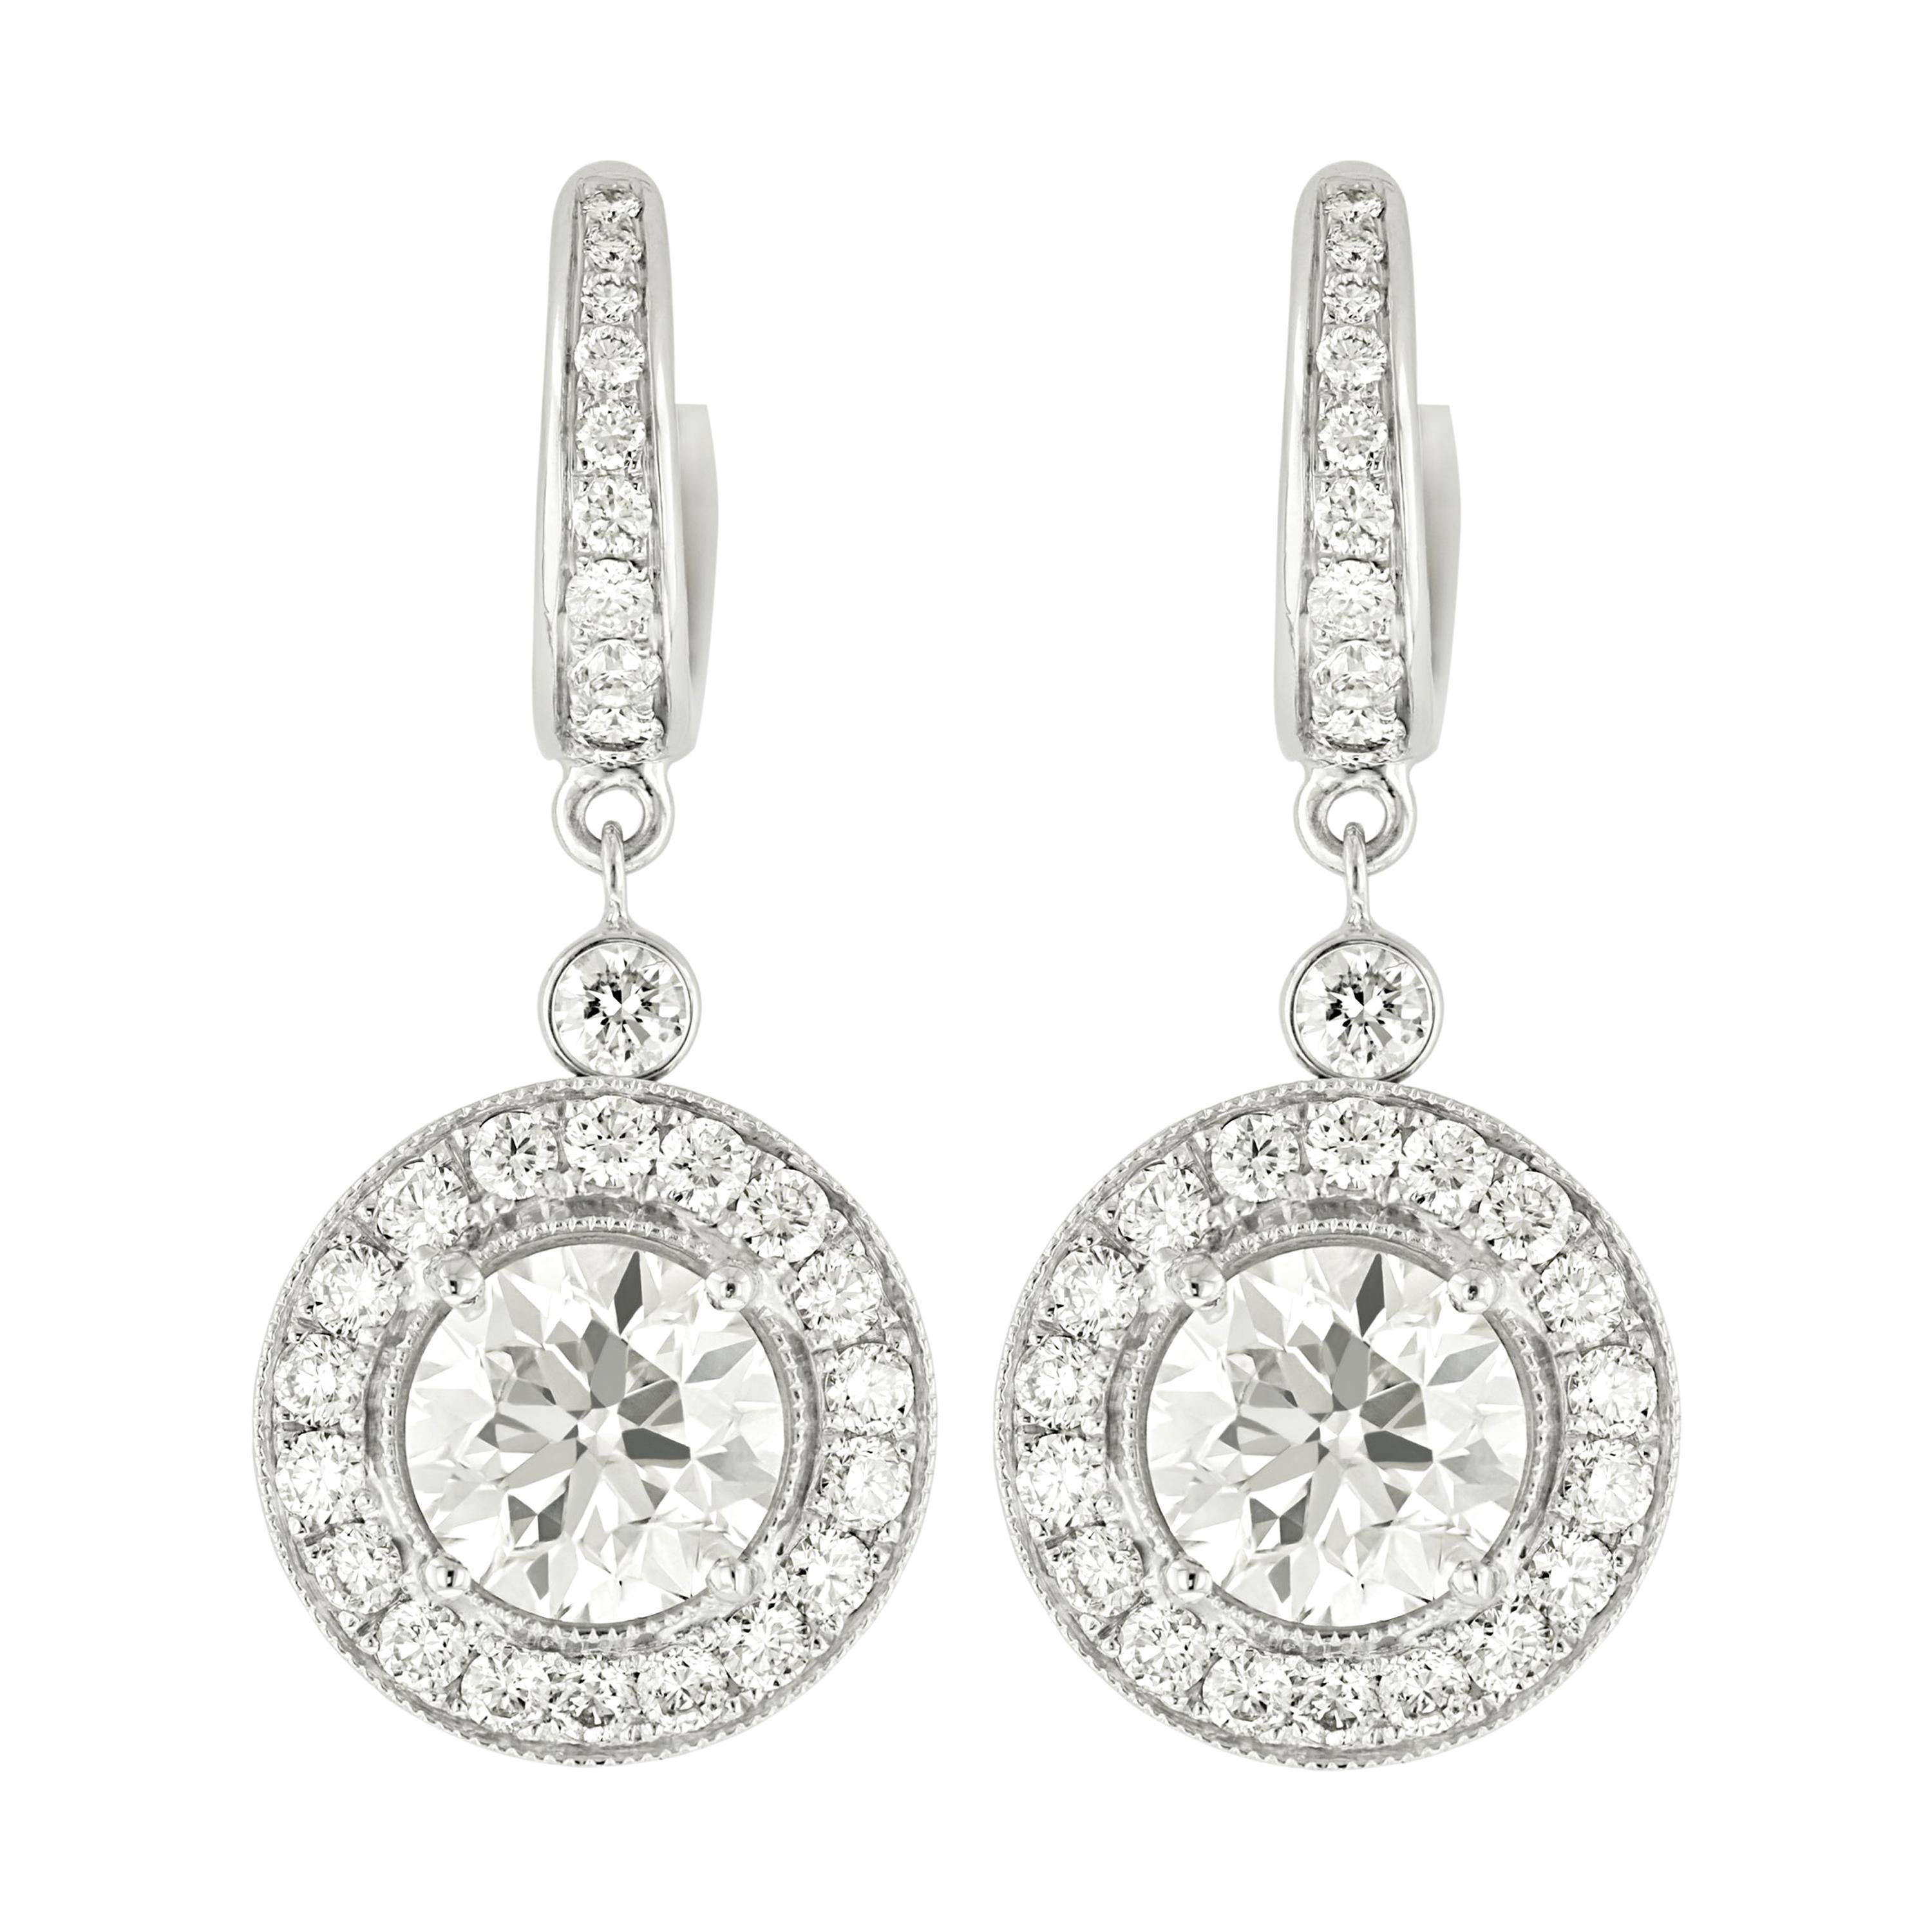 18kt White Gold Earrings with Round Diamonds Center